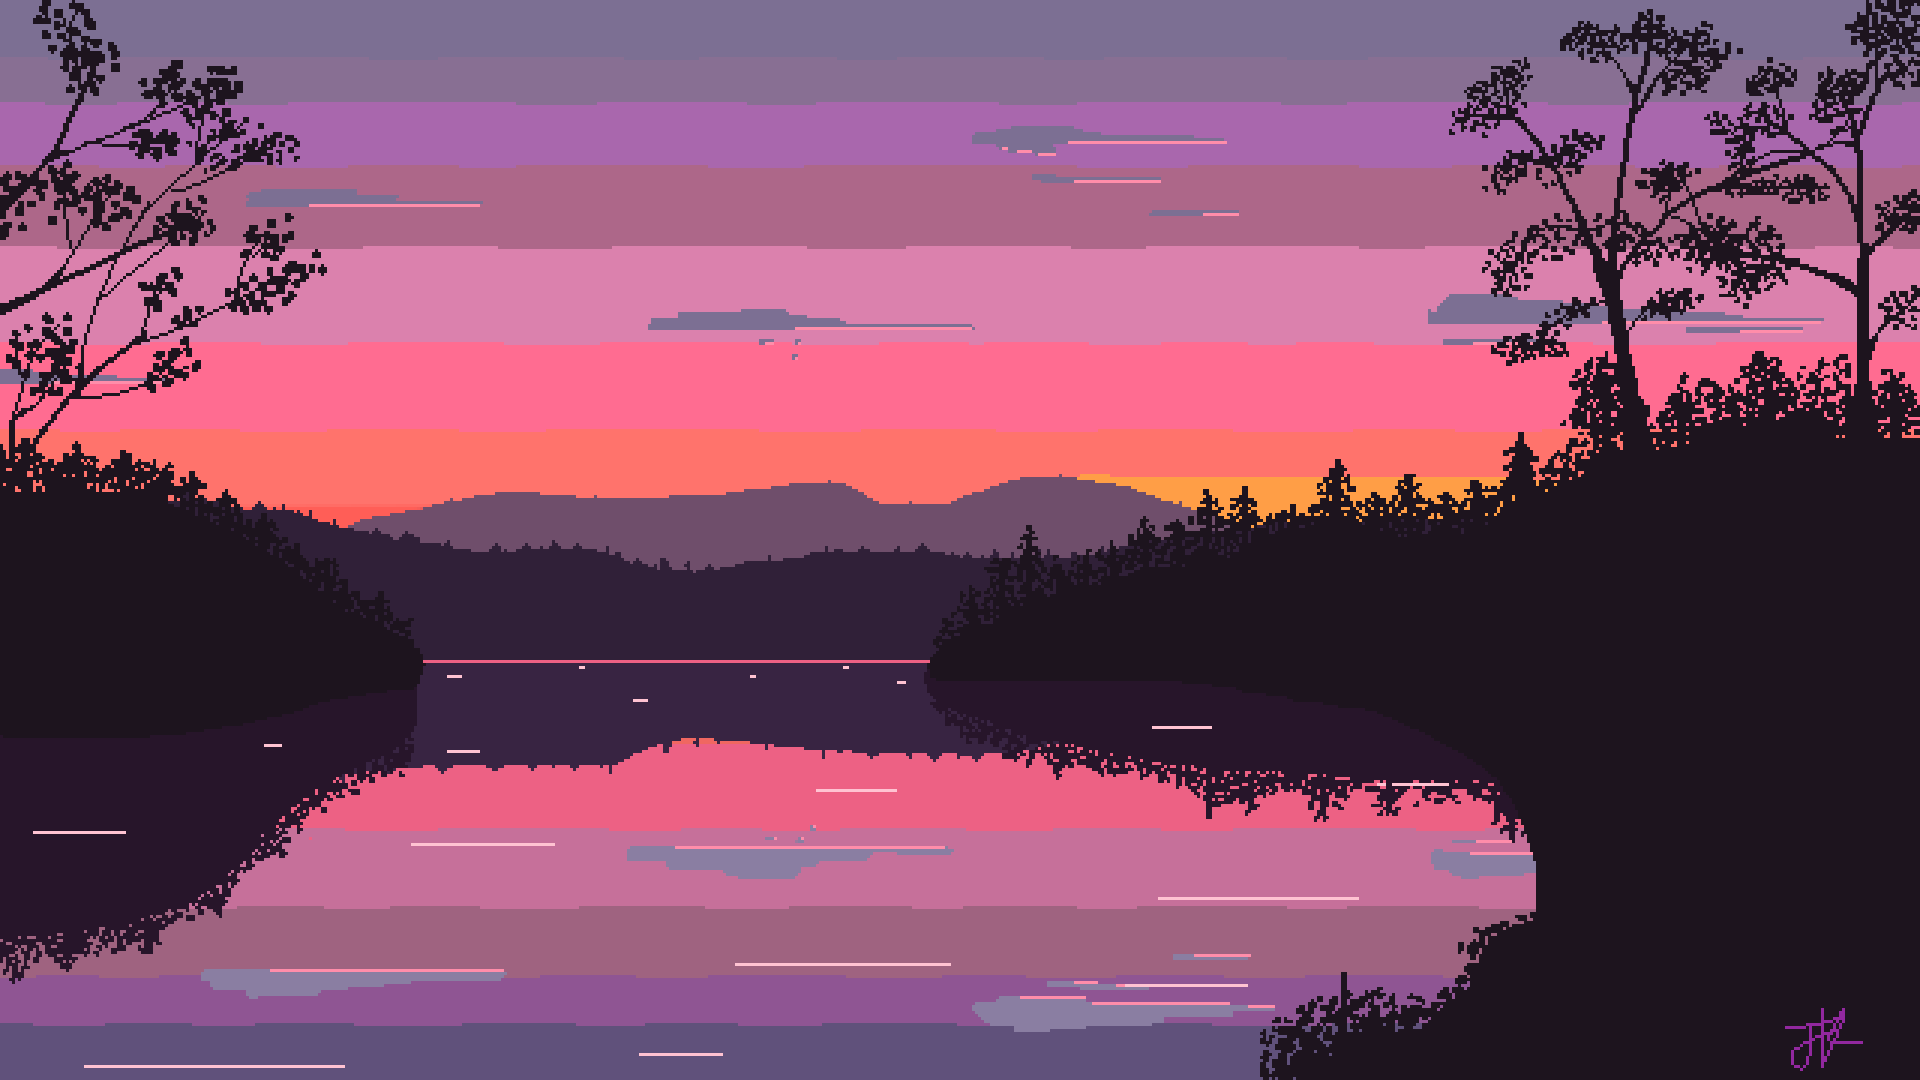 Wallpaper / nature, landscape, pixel art, pixelated, pixels, mountains, Wavestormed, trees, spring, forest, lake, reflection, pink clouds free download